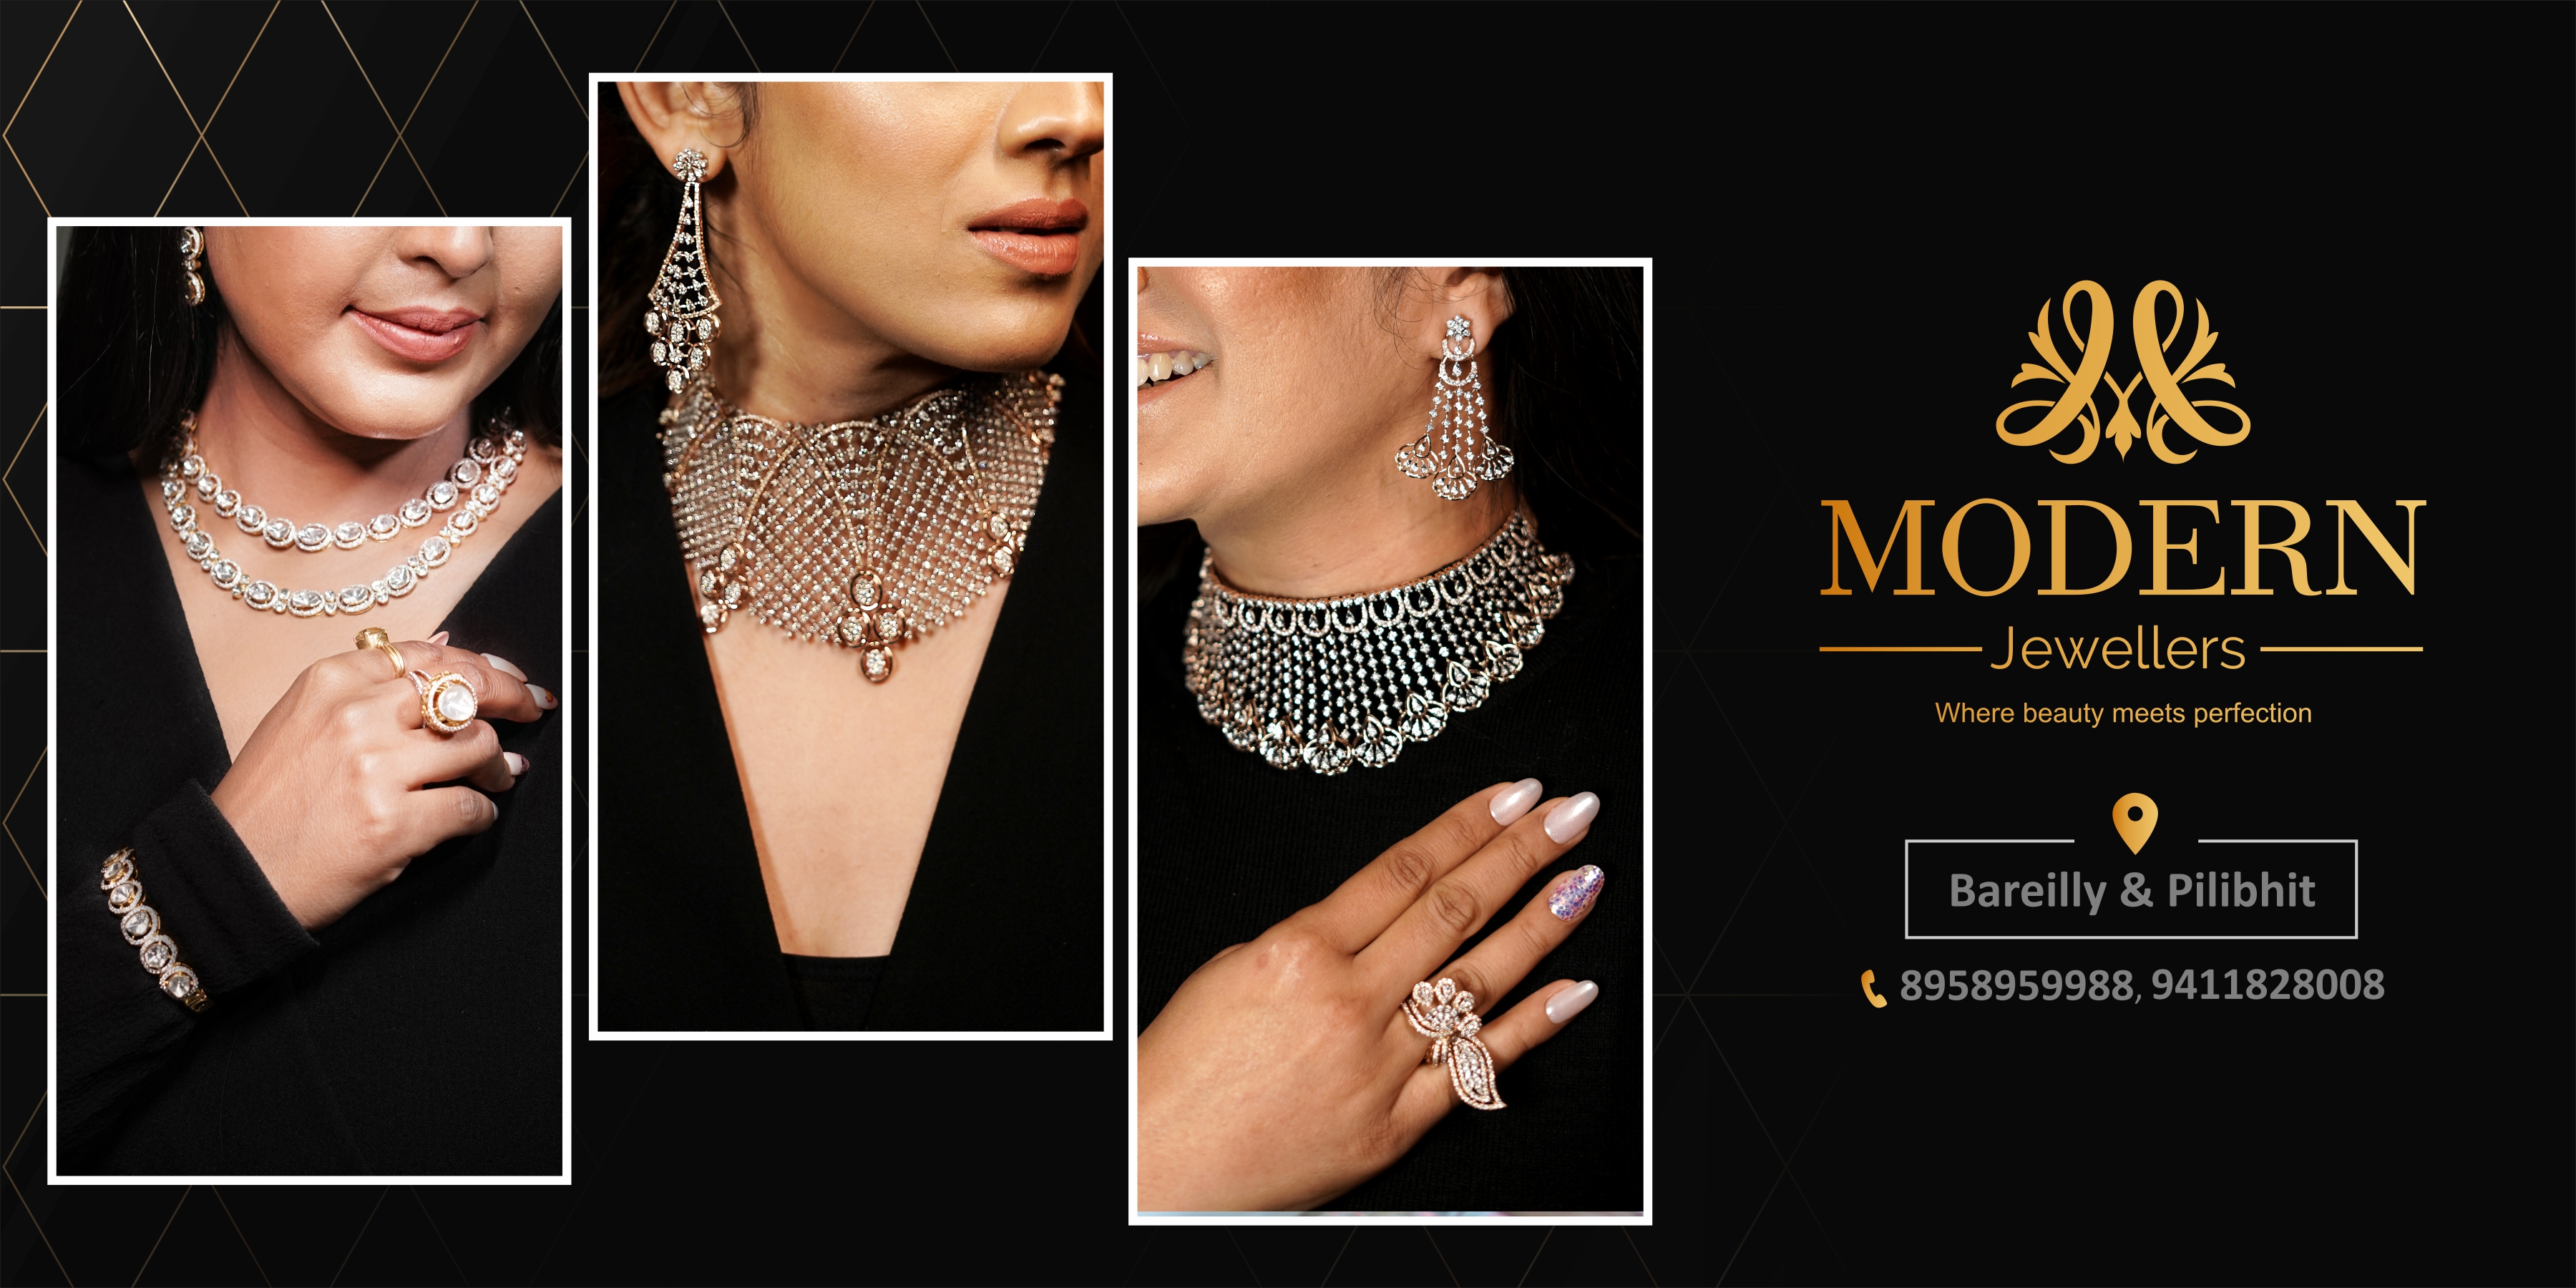 Modern Jewellers - Where beauty meets perfection